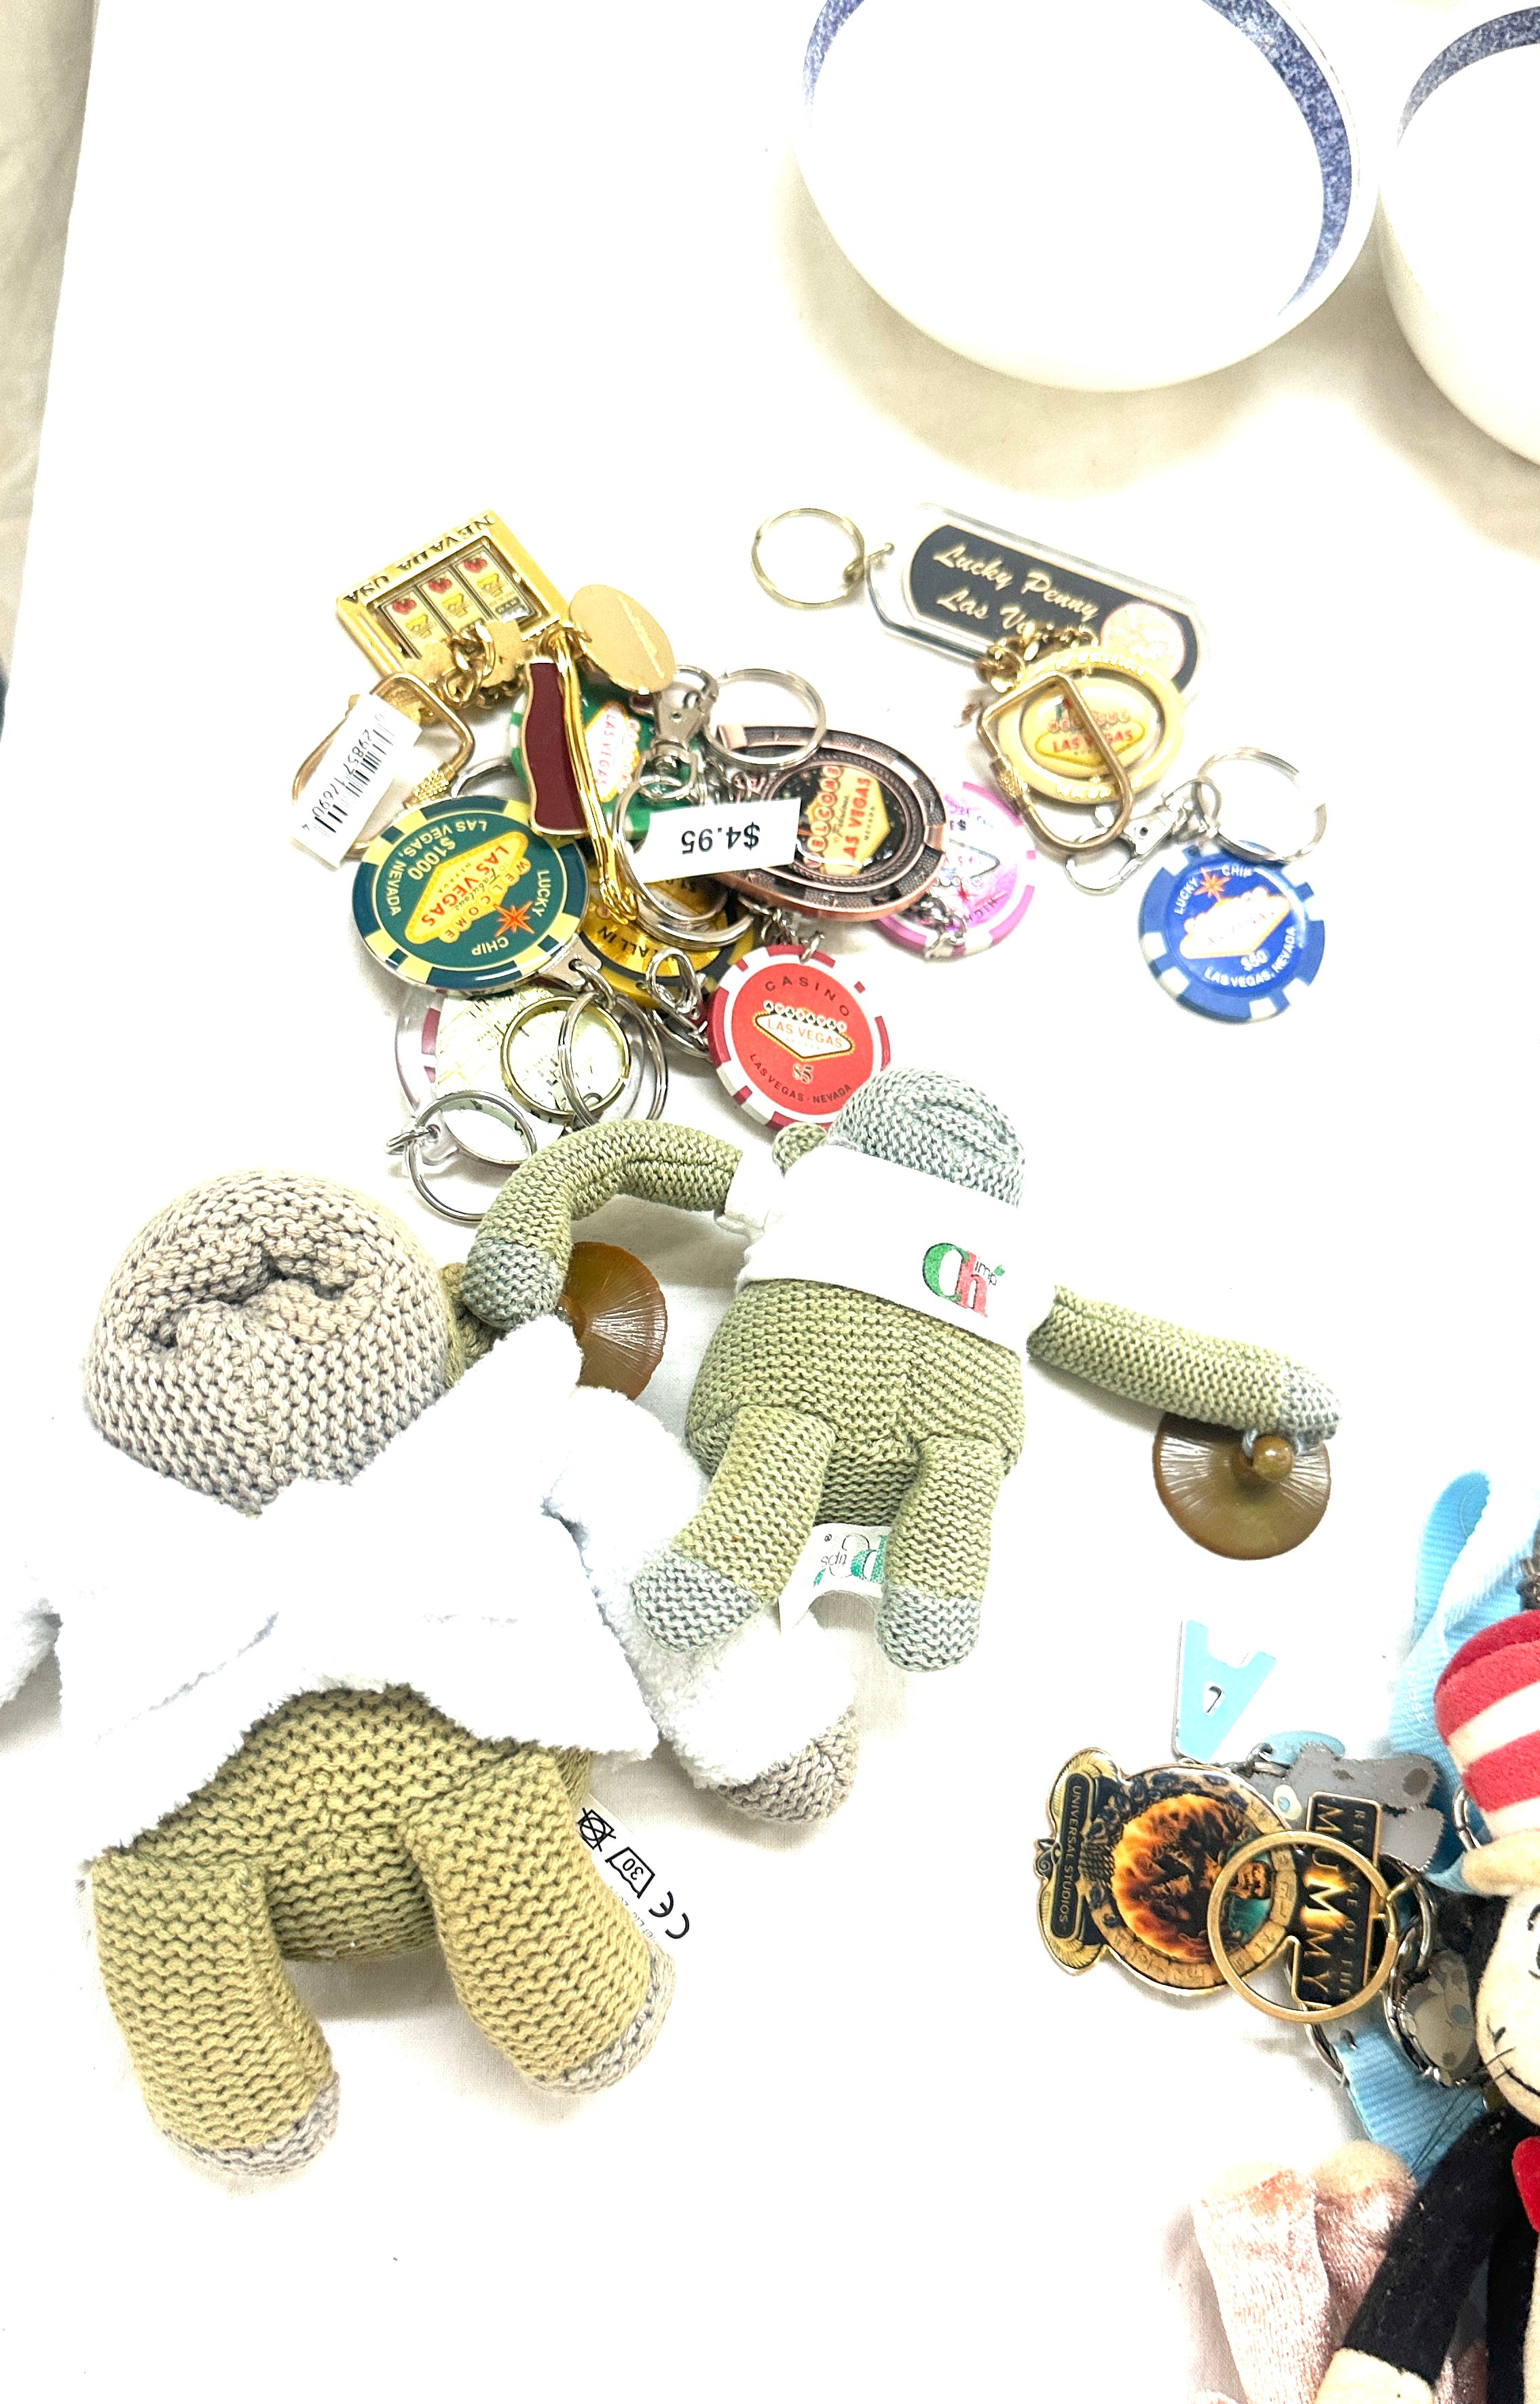 Selection of assorted key rings includes DR Zuesss, plush toy, make up bag, british air ways etc - Image 3 of 5